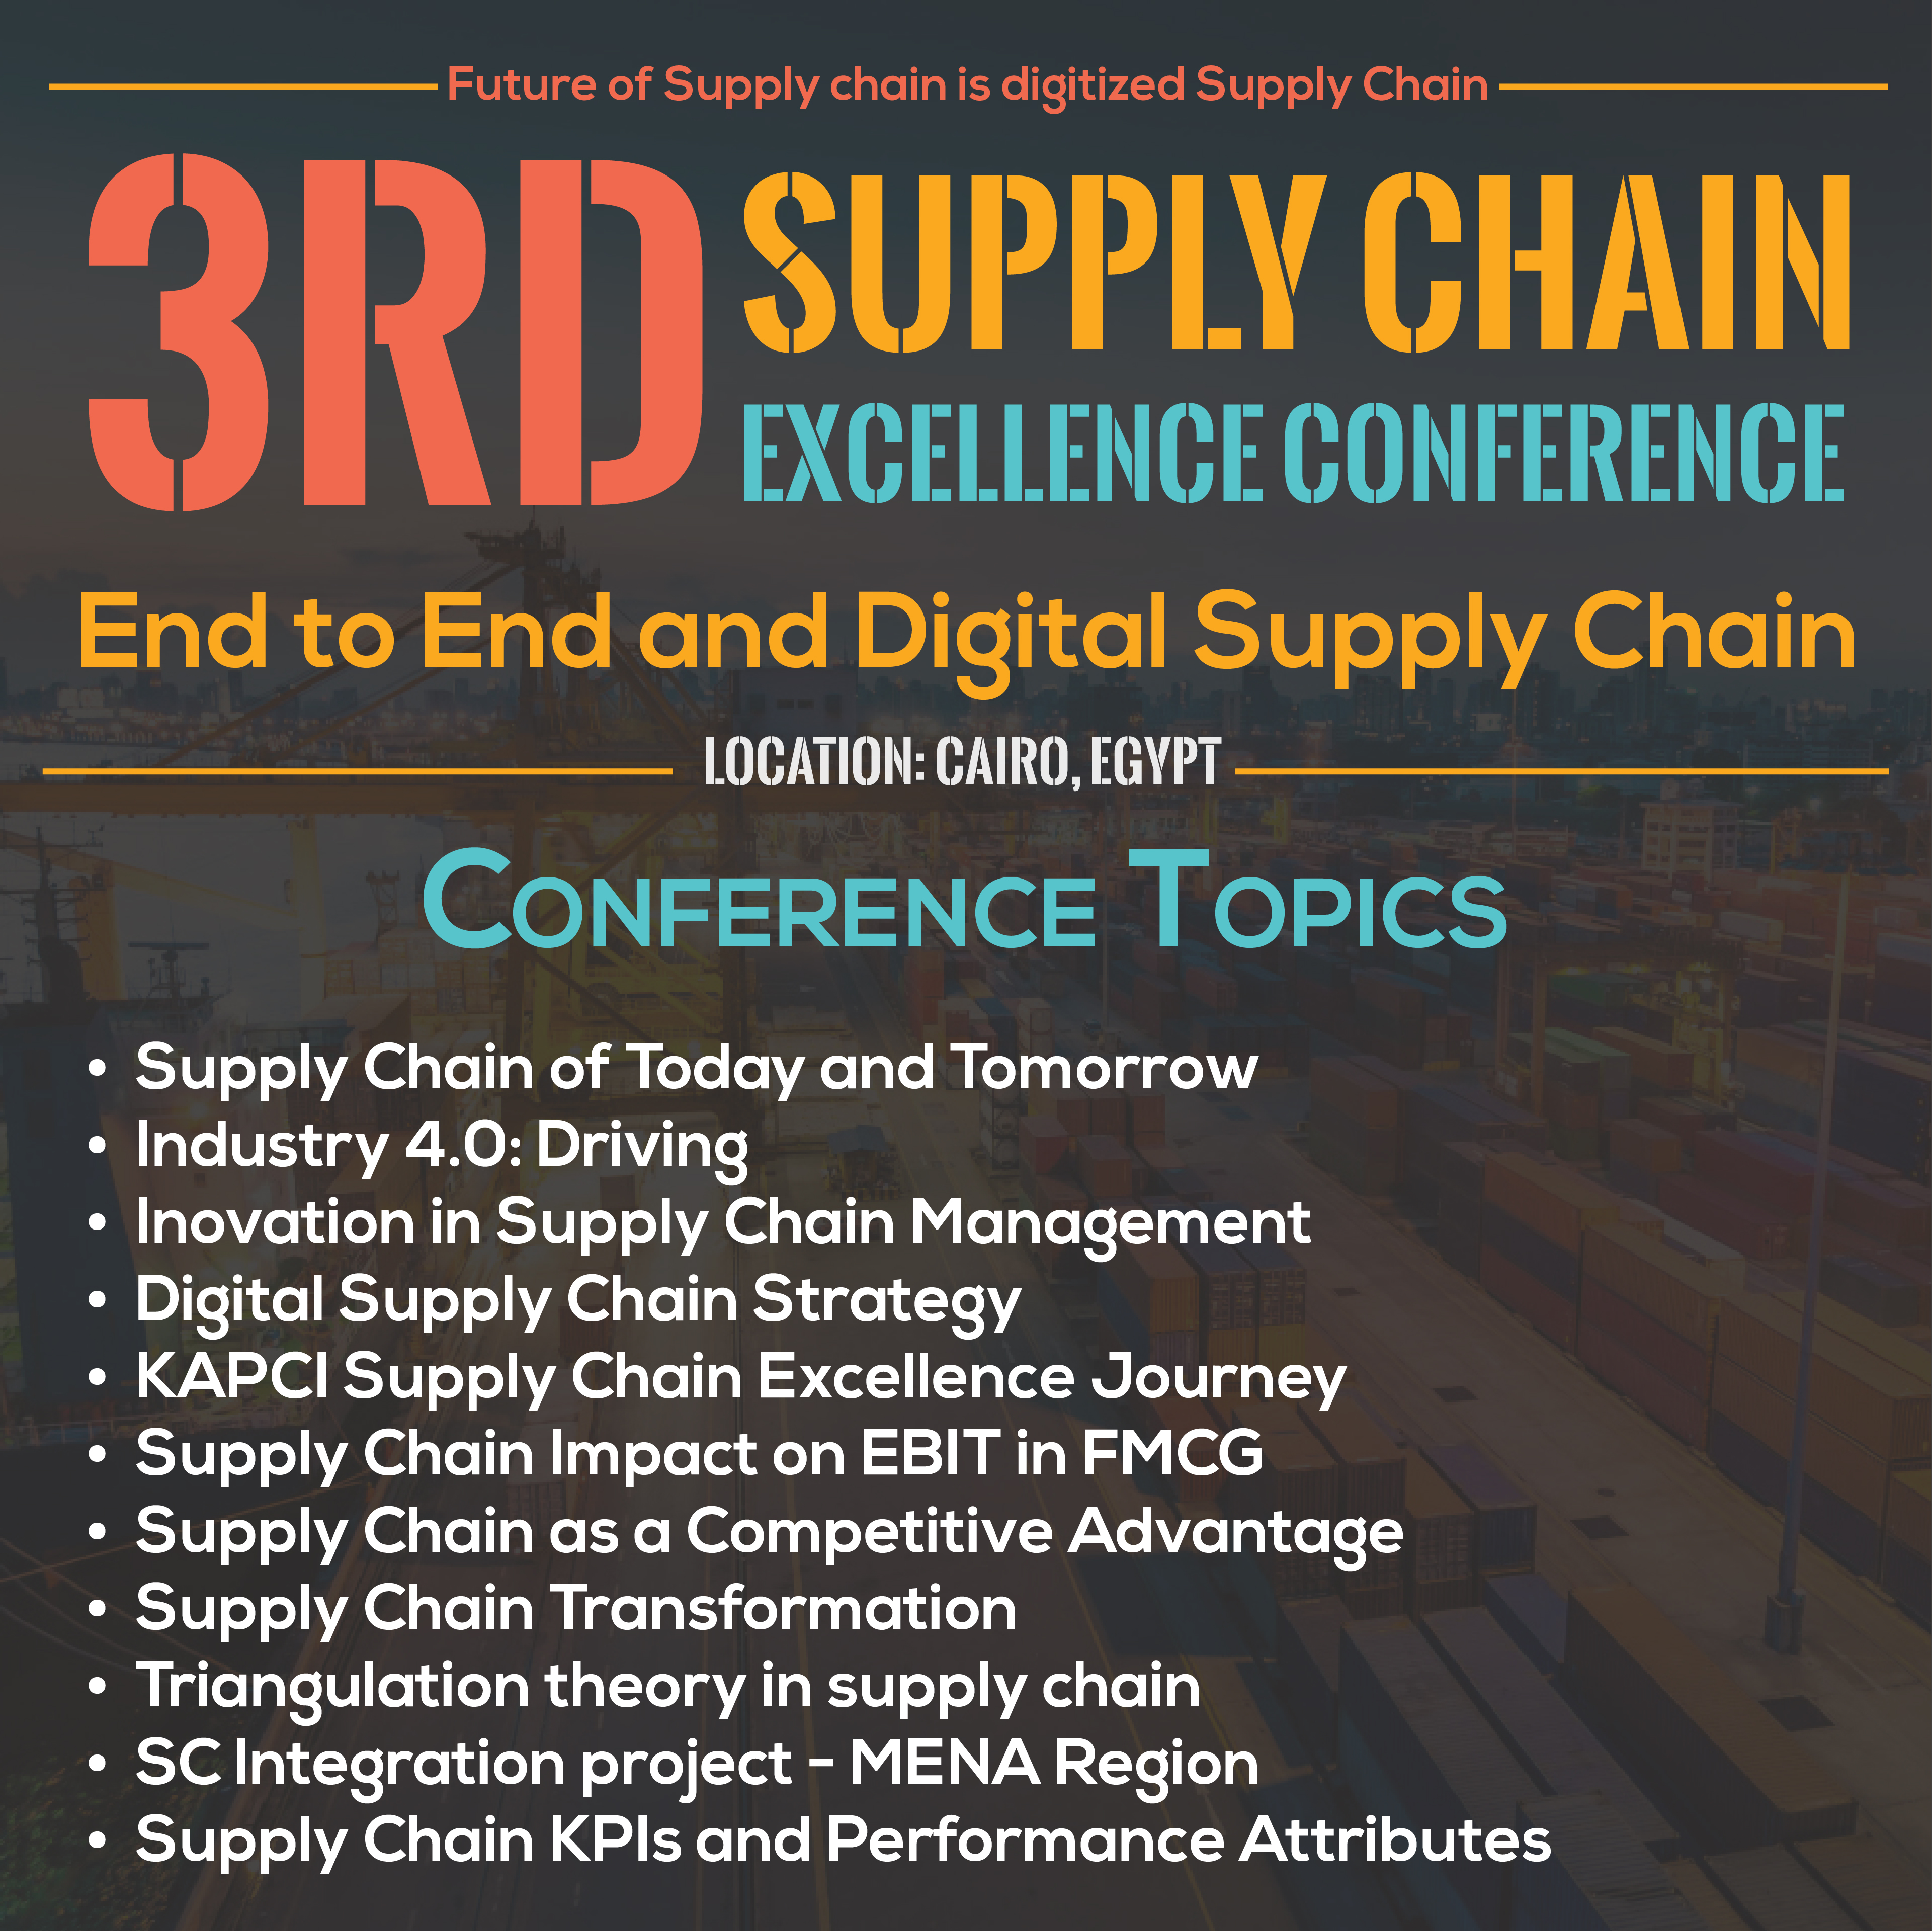 Supply Chain KPIs and Performance Attributes Workshop - March 2019